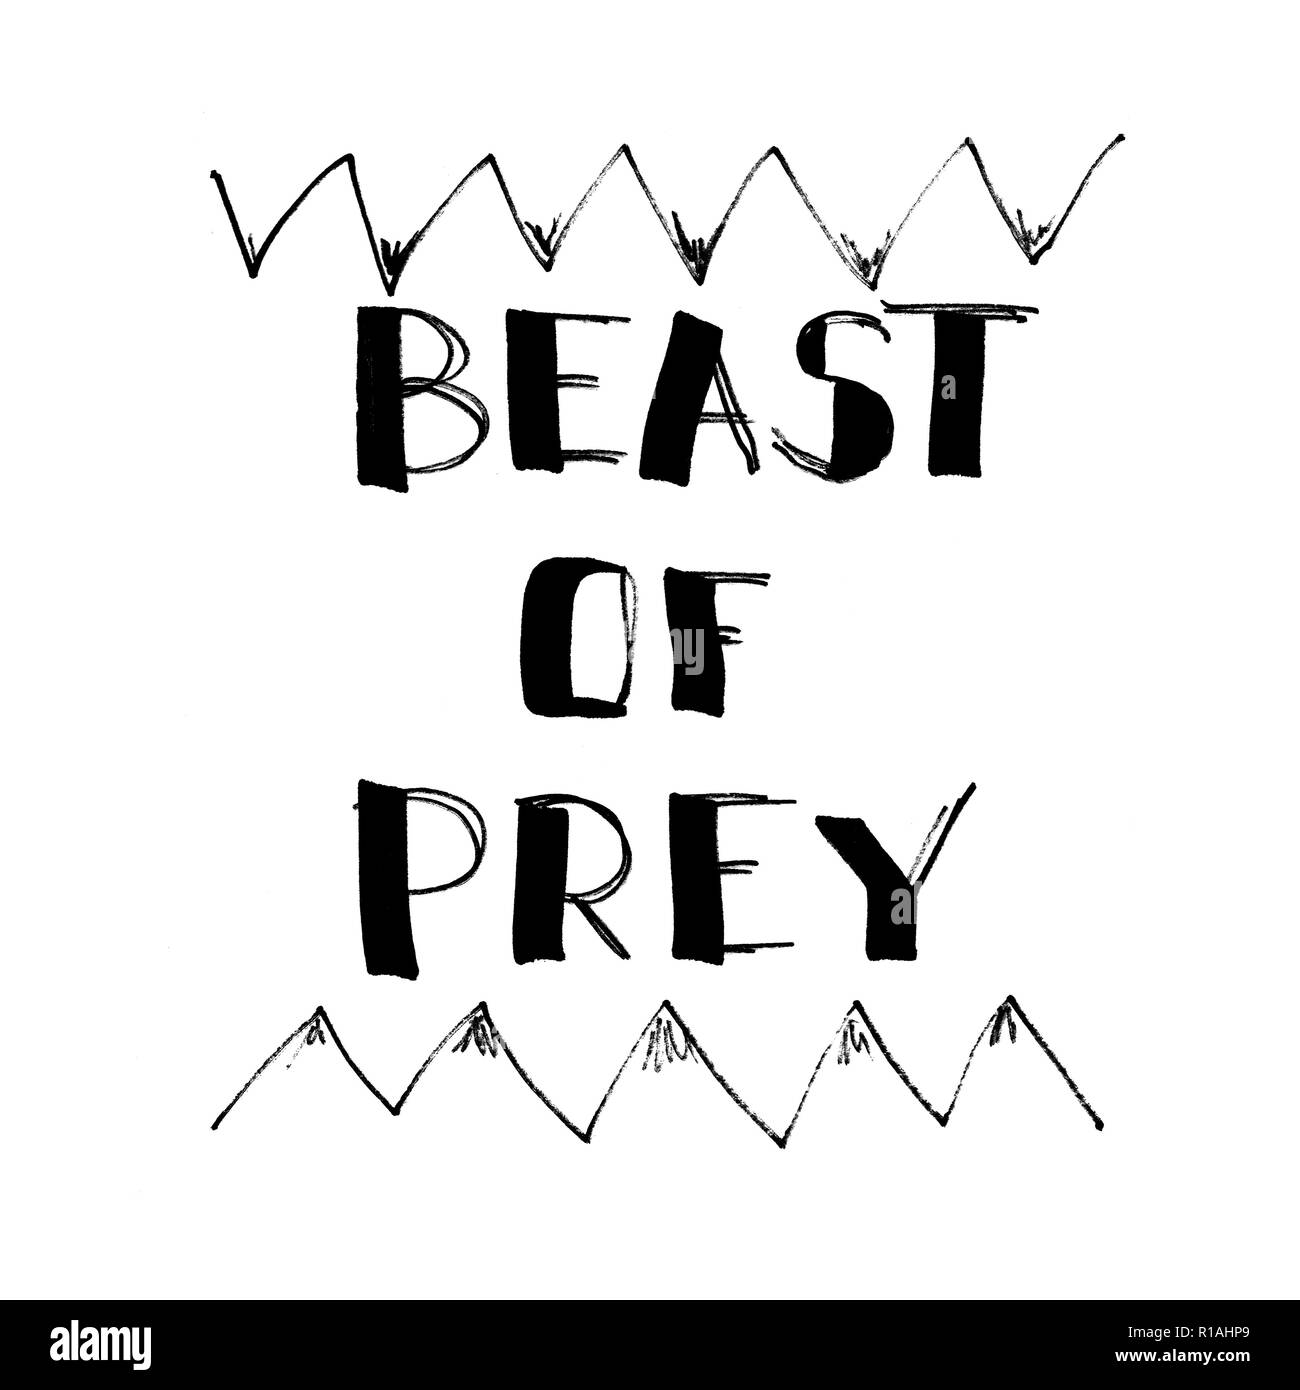 Beast Of Prey - Lettering, comic design for t-shirt or poster Stock Photo